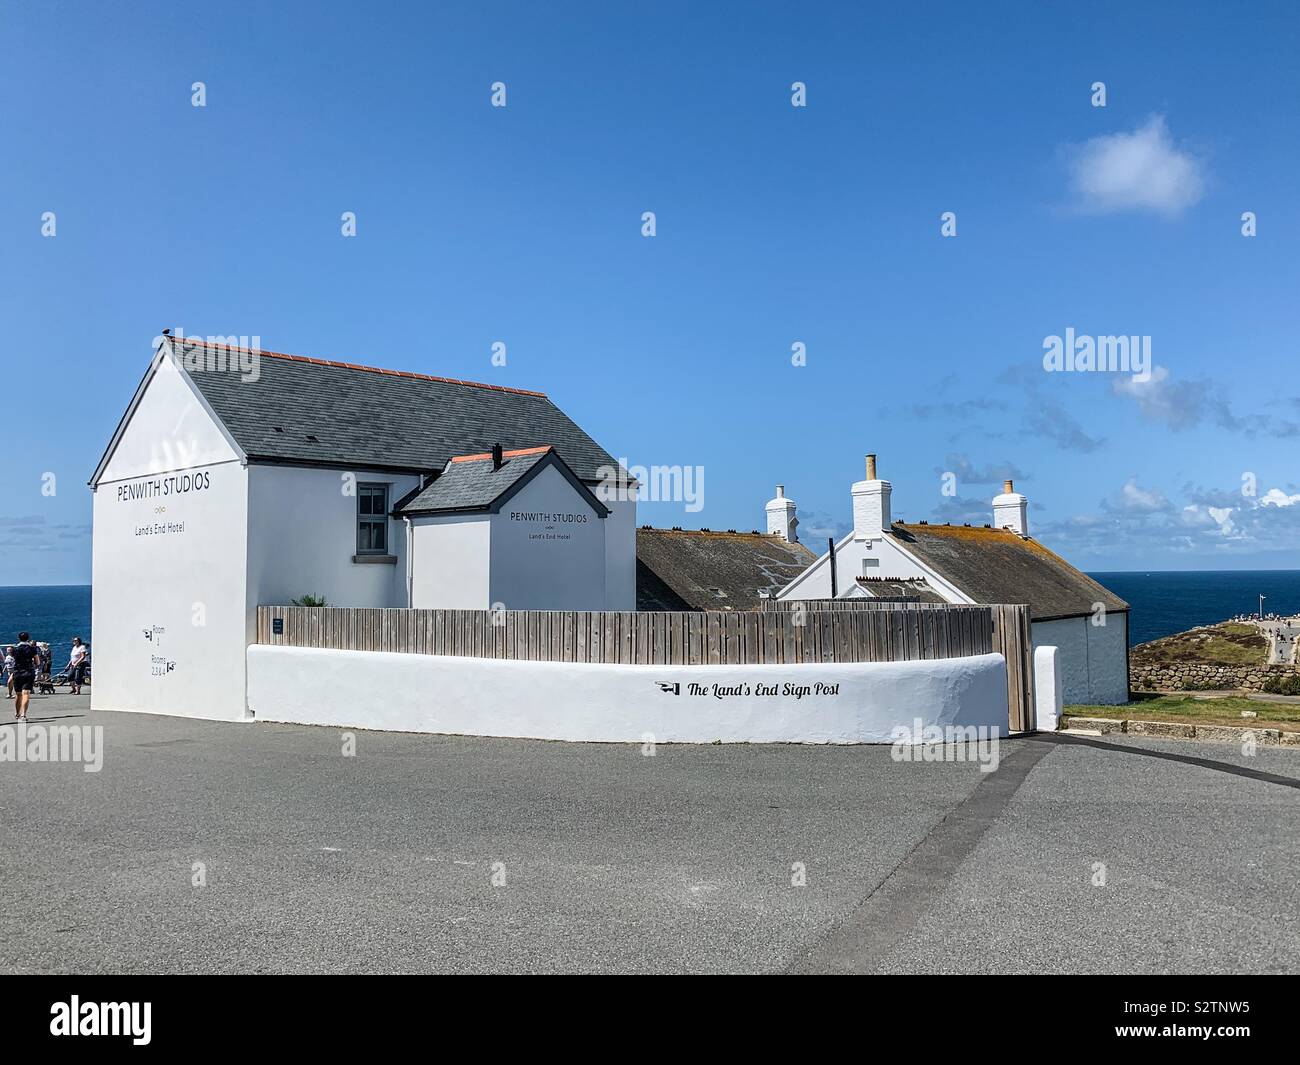 Penwith Studios Land's End hotel Foto Stock